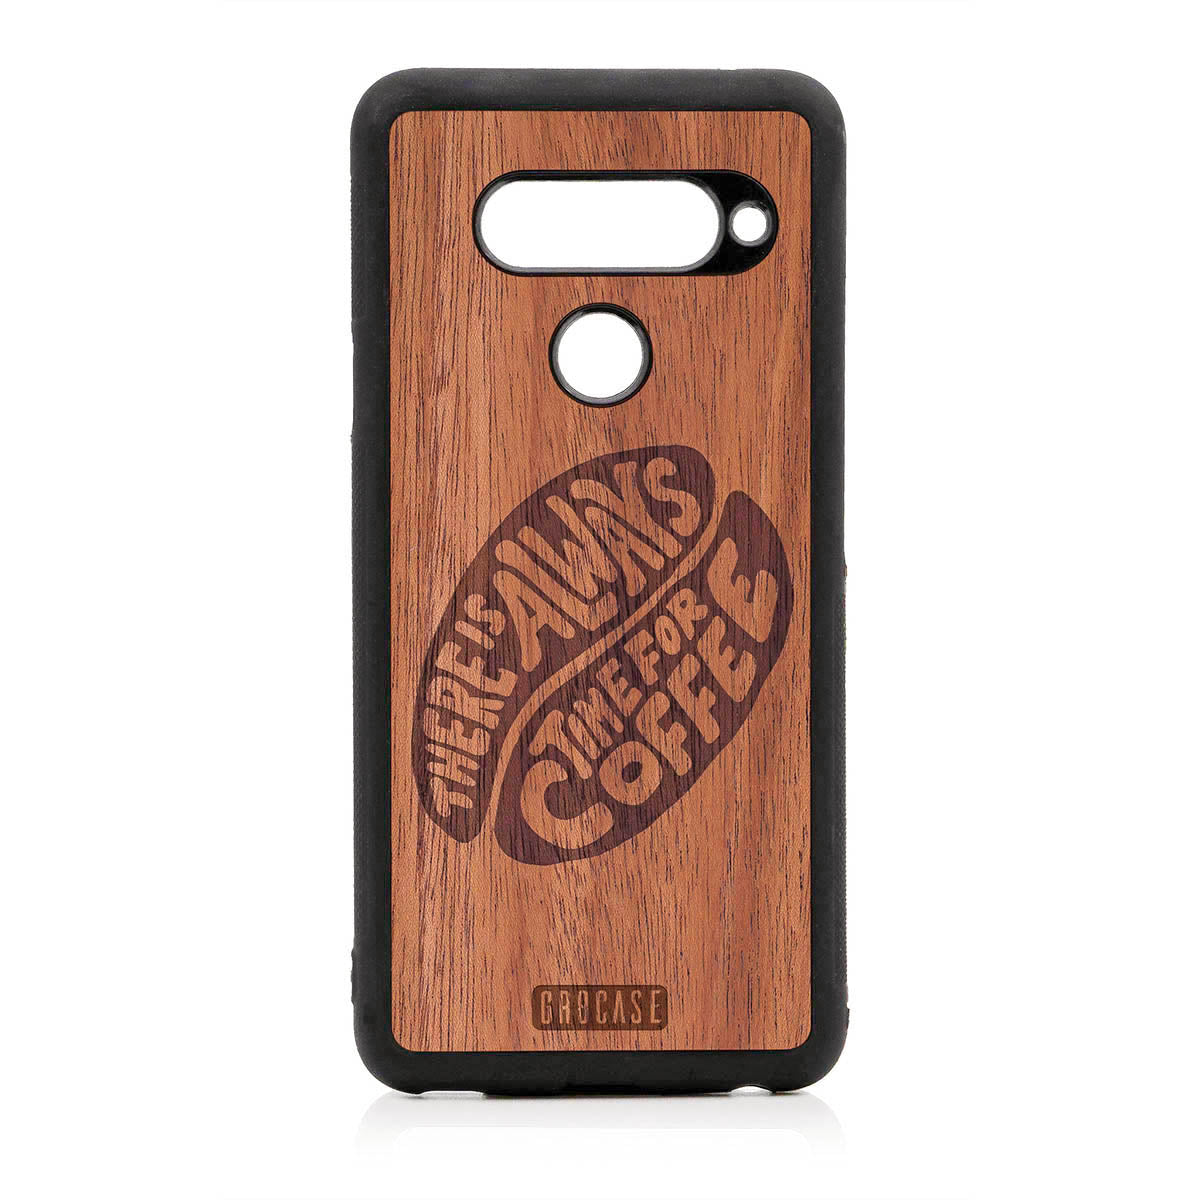 There Is Always Time For Coffee Design Wood Case For LG V40